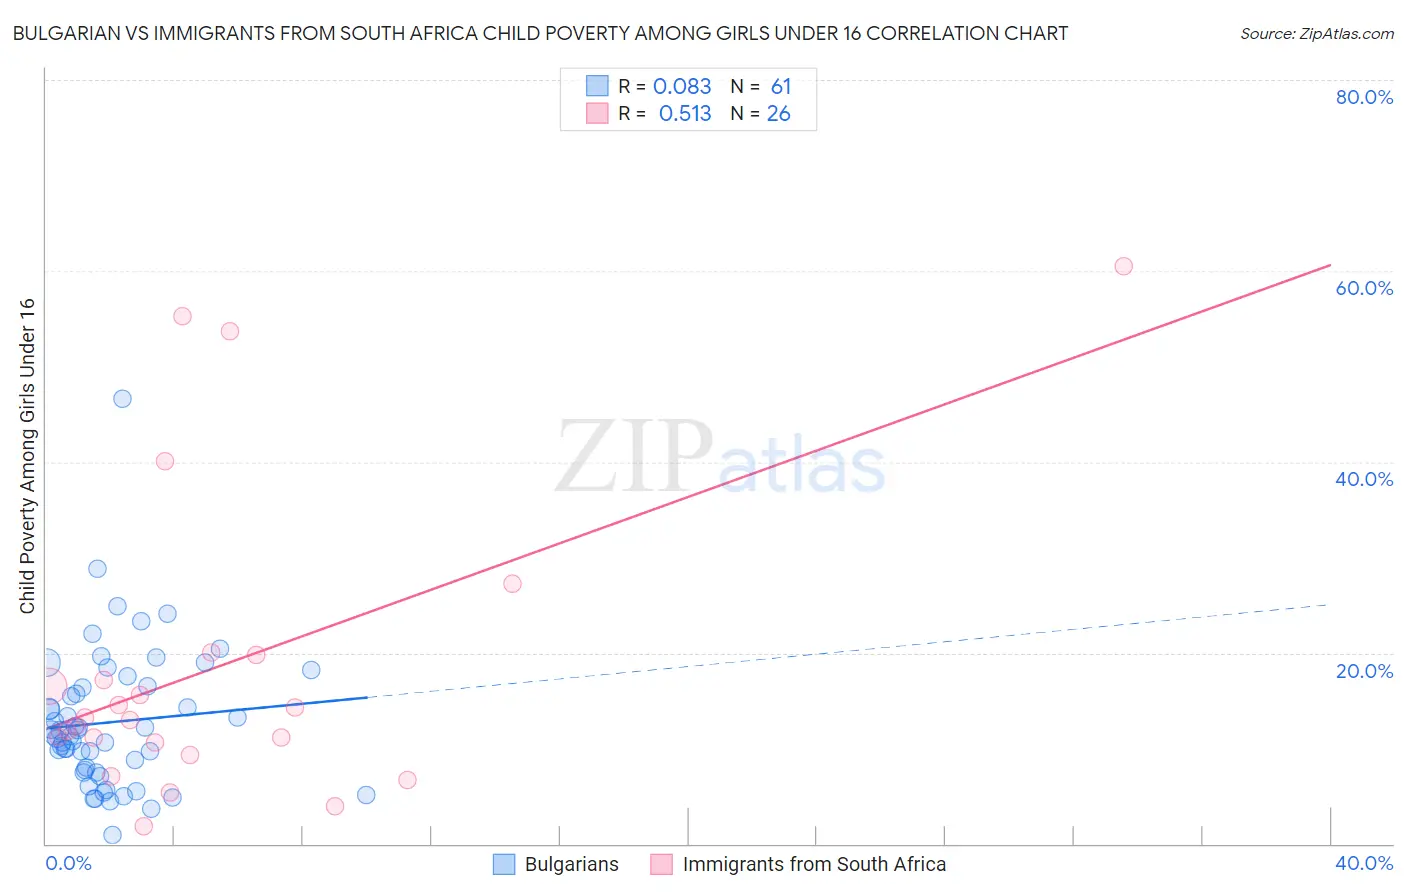 Bulgarian vs Immigrants from South Africa Child Poverty Among Girls Under 16